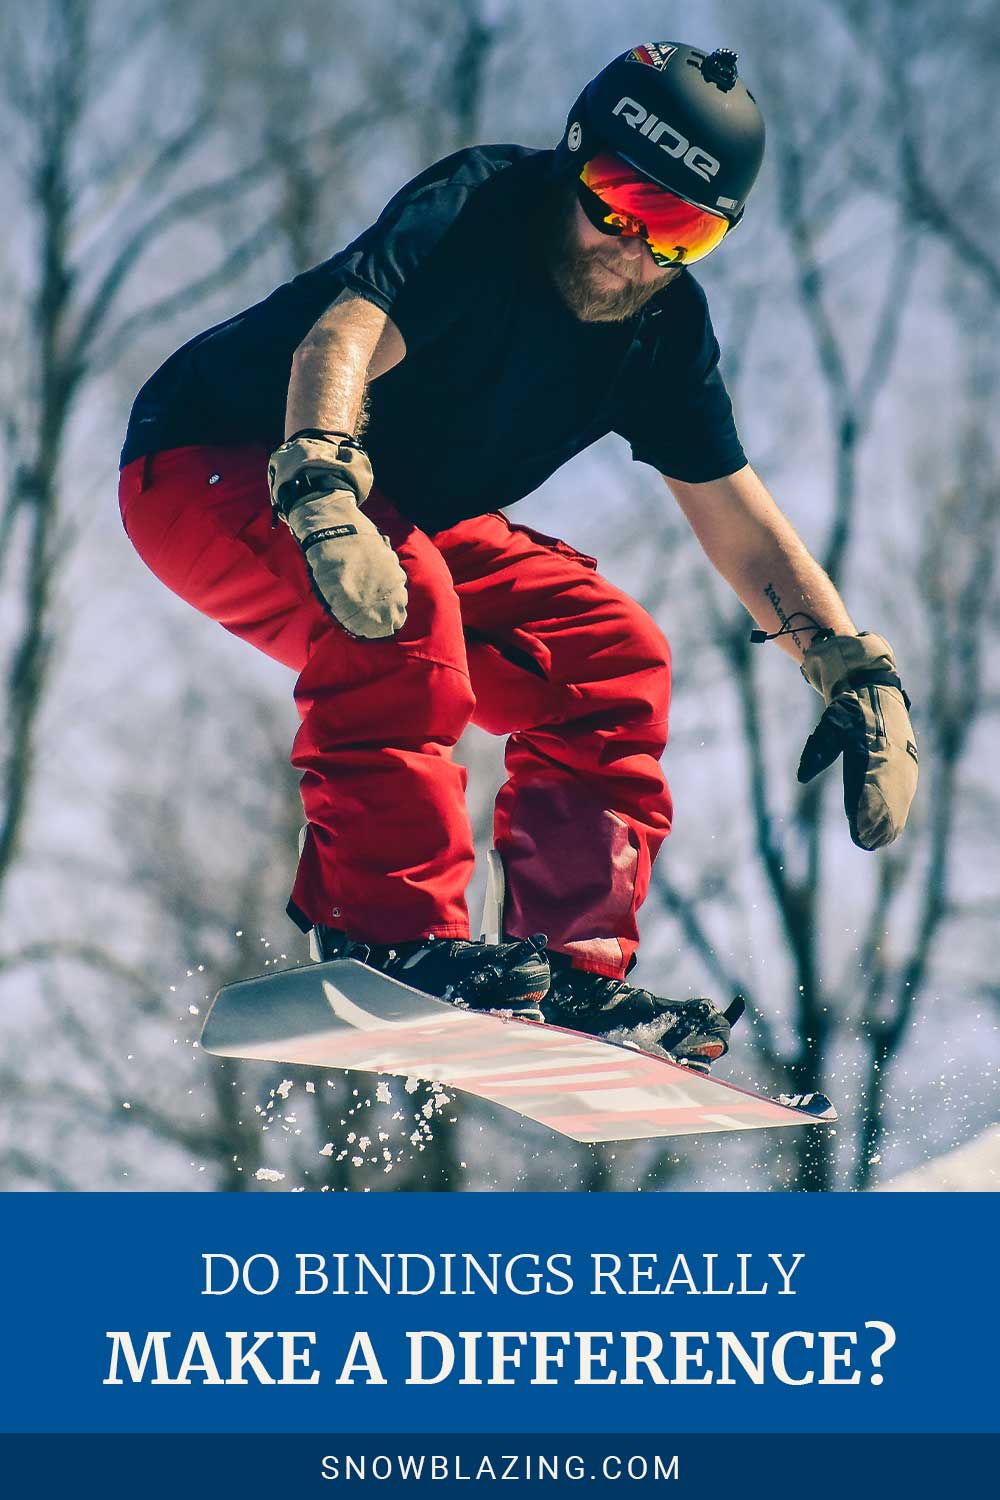 Man in black t-shirt jumping on a snowboard - Do Bindings Really Make A Difference?